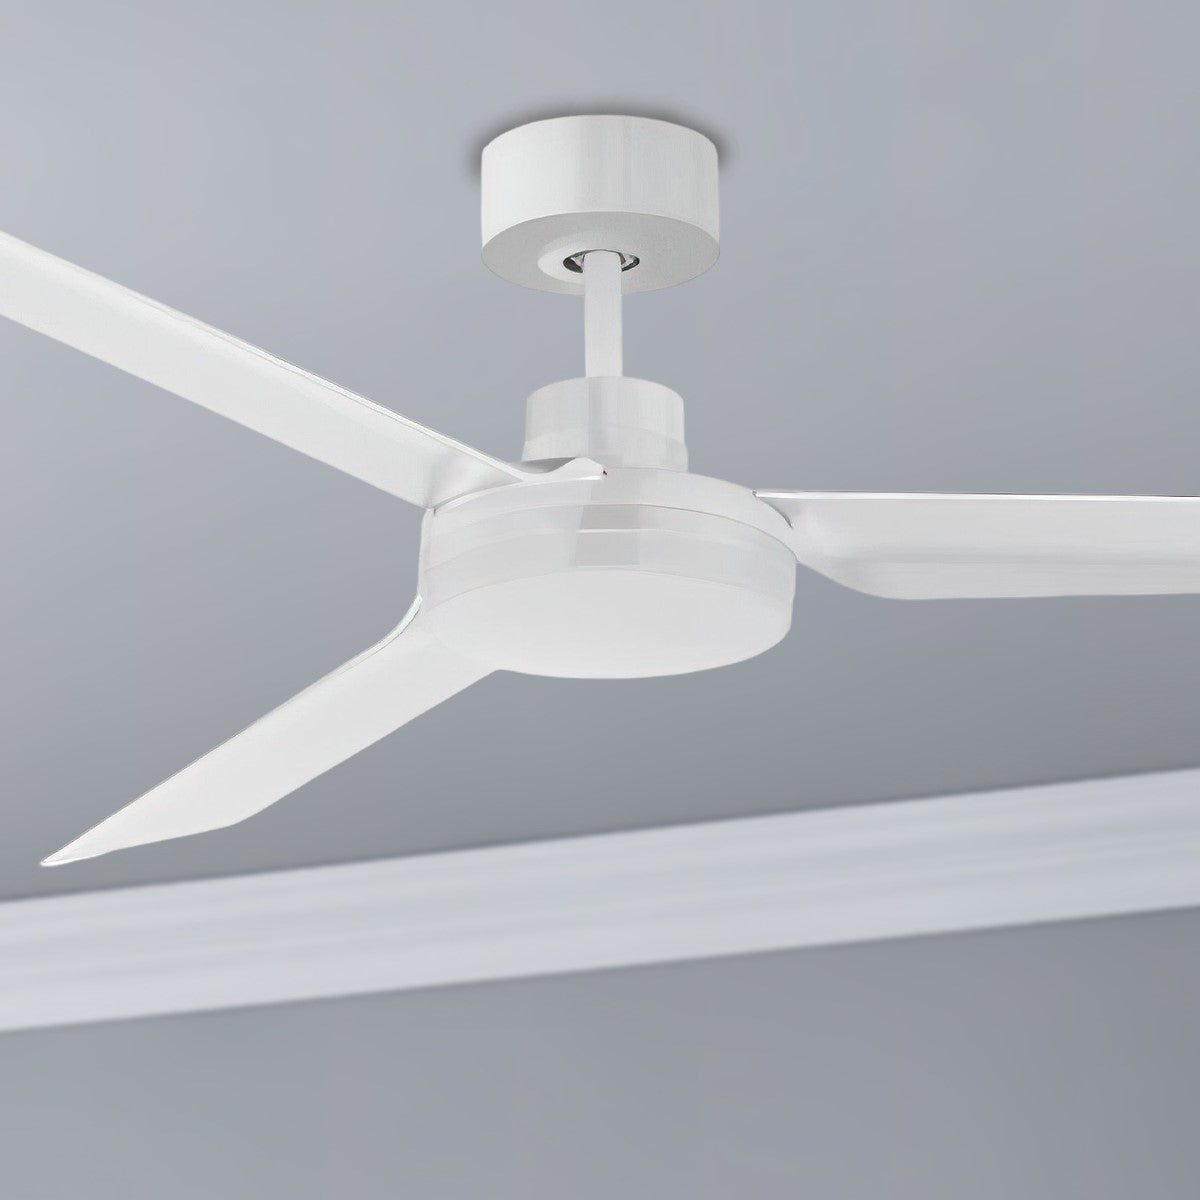 Ultra Slim 52 Inch 3 Blades Indoor/Outdoor Ceiling Fan, Wall Control Included